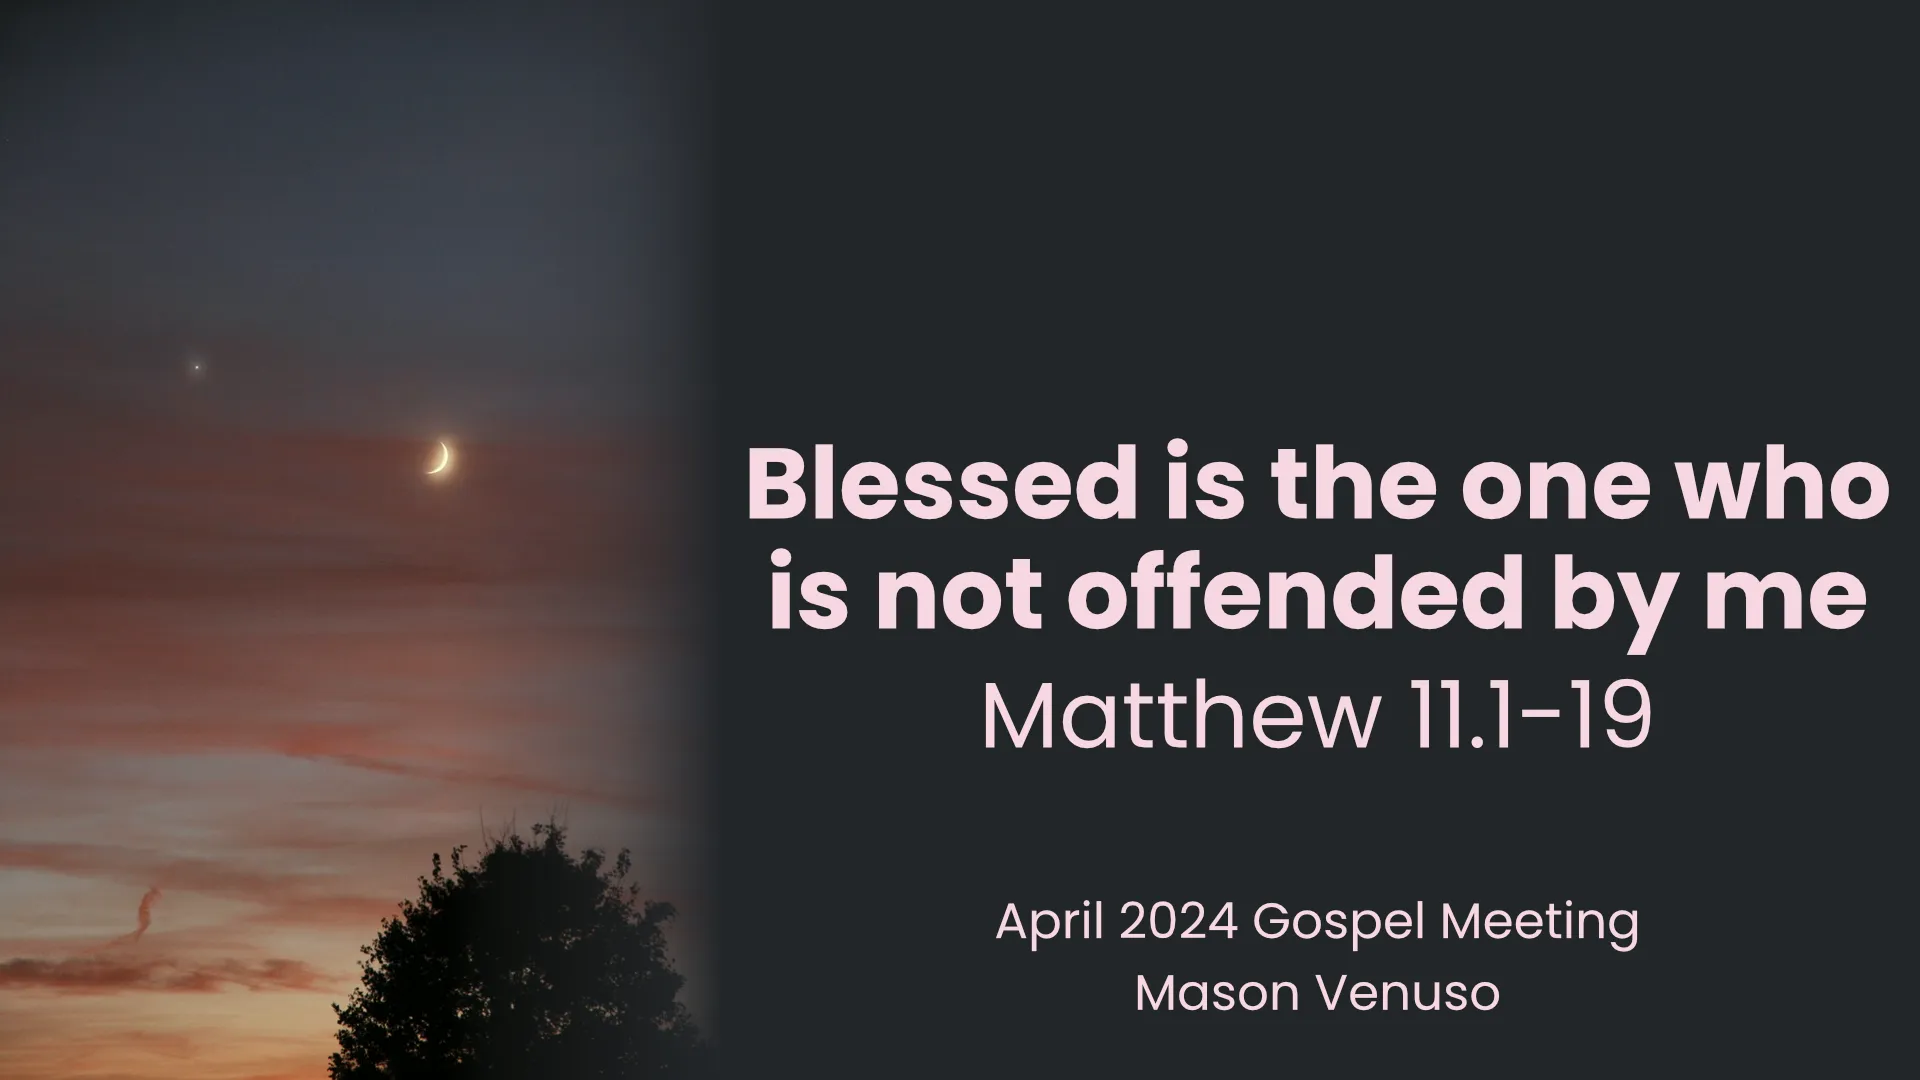 Blessed is the one who is not offended by me